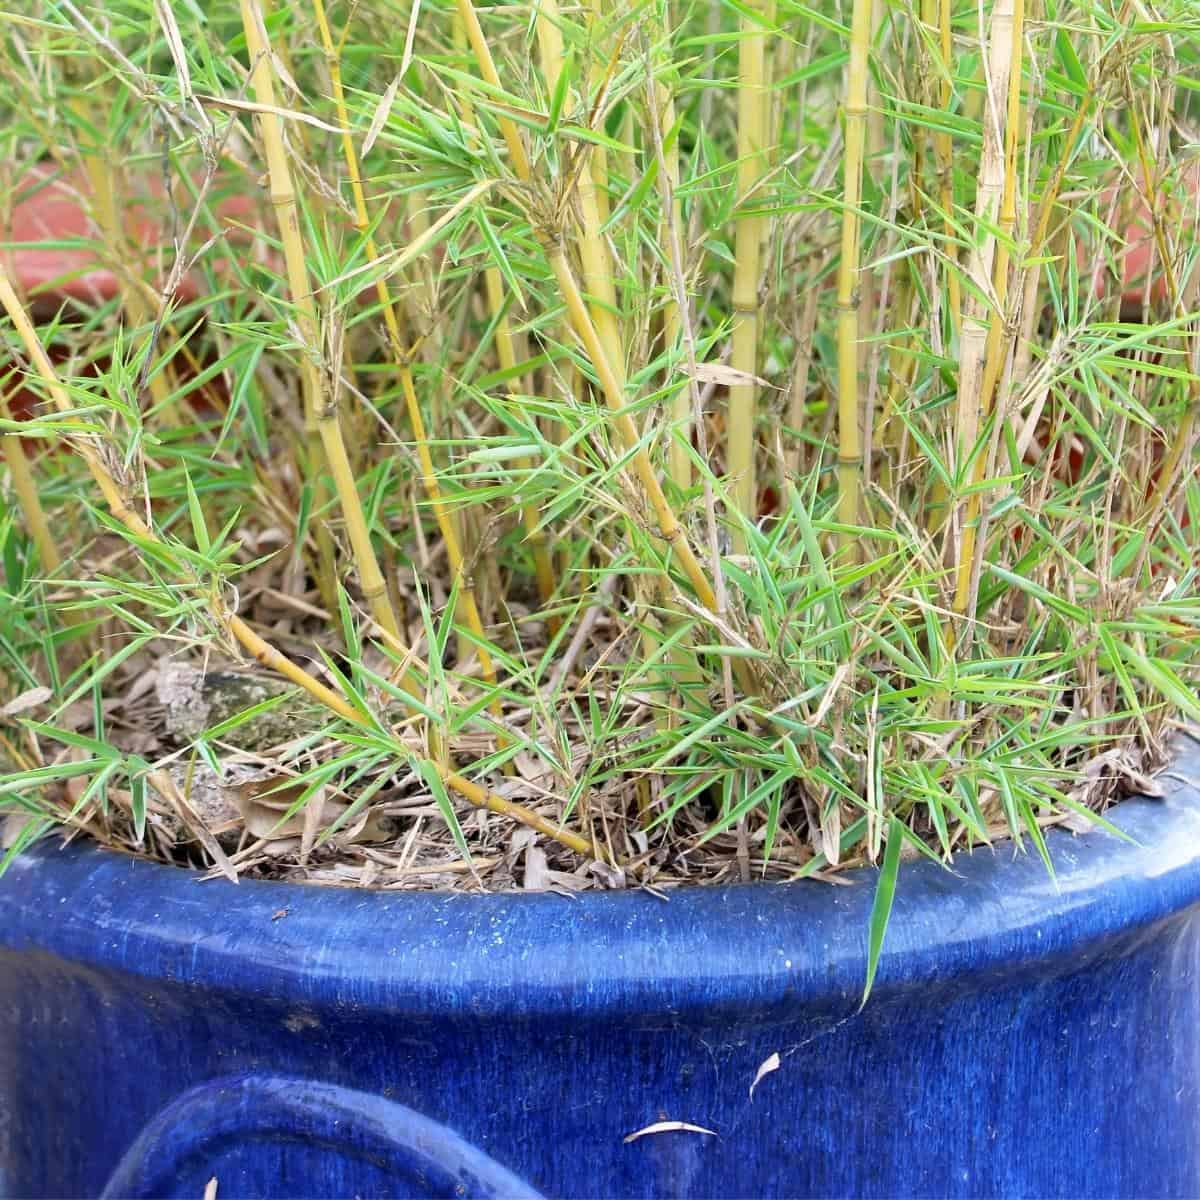 bamboo growing in a pot